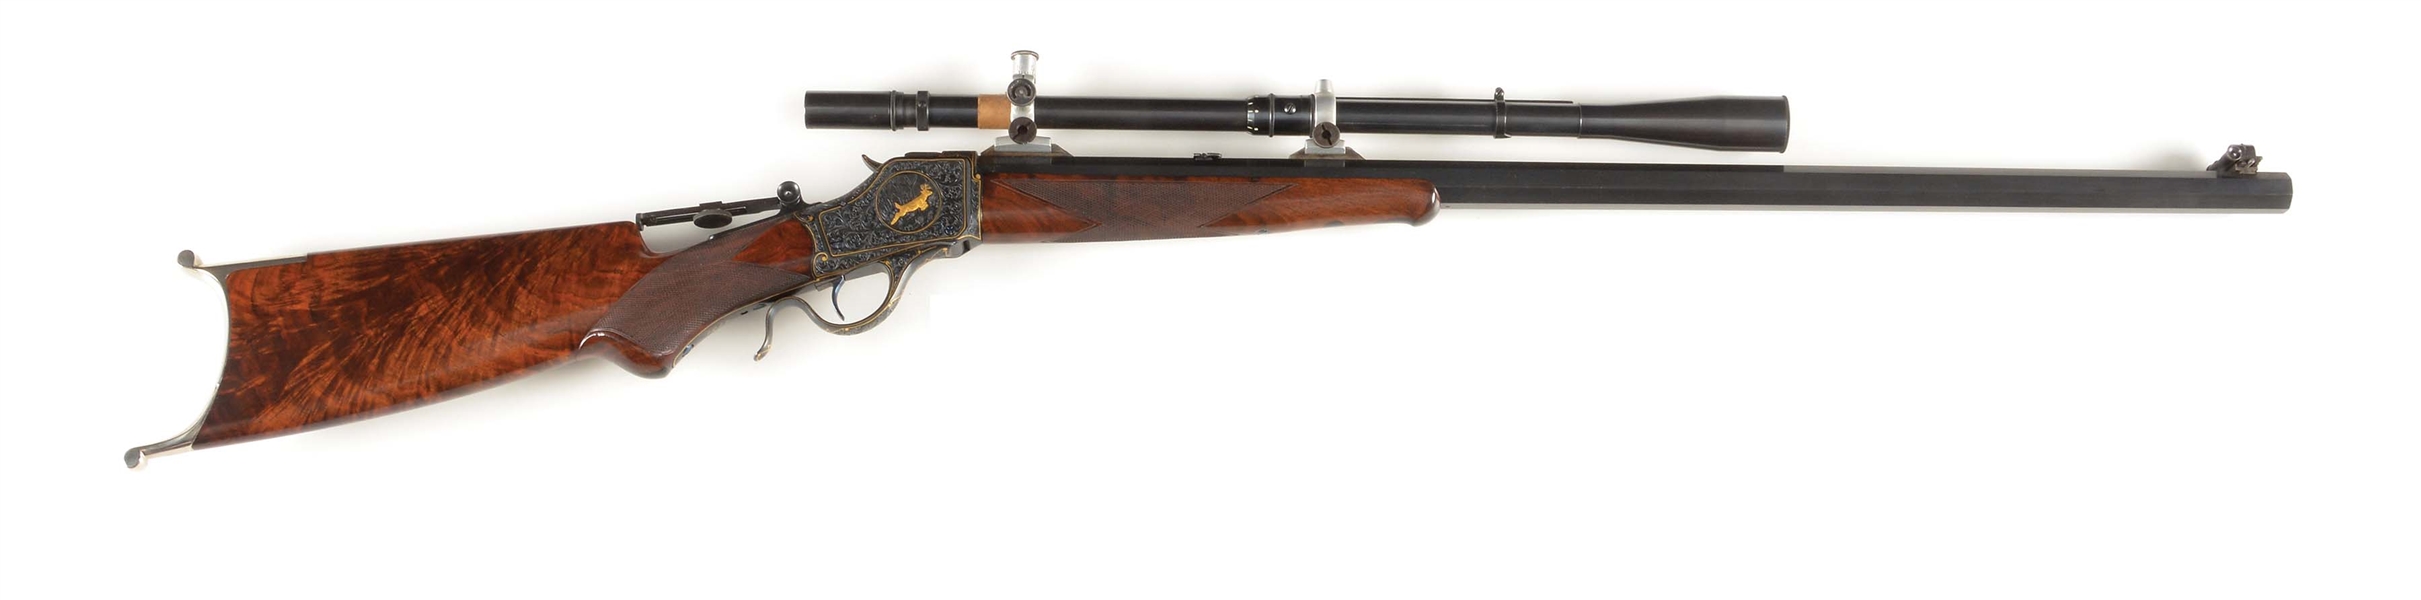 (C) FINE WINCHESTER HI-WALL OFF HAND SINGLE SHOT RIFLE WITH SCOPE, CUSTOM ENGRAVED BY THE LATE MASTER RAY VIRAMONTEZ.